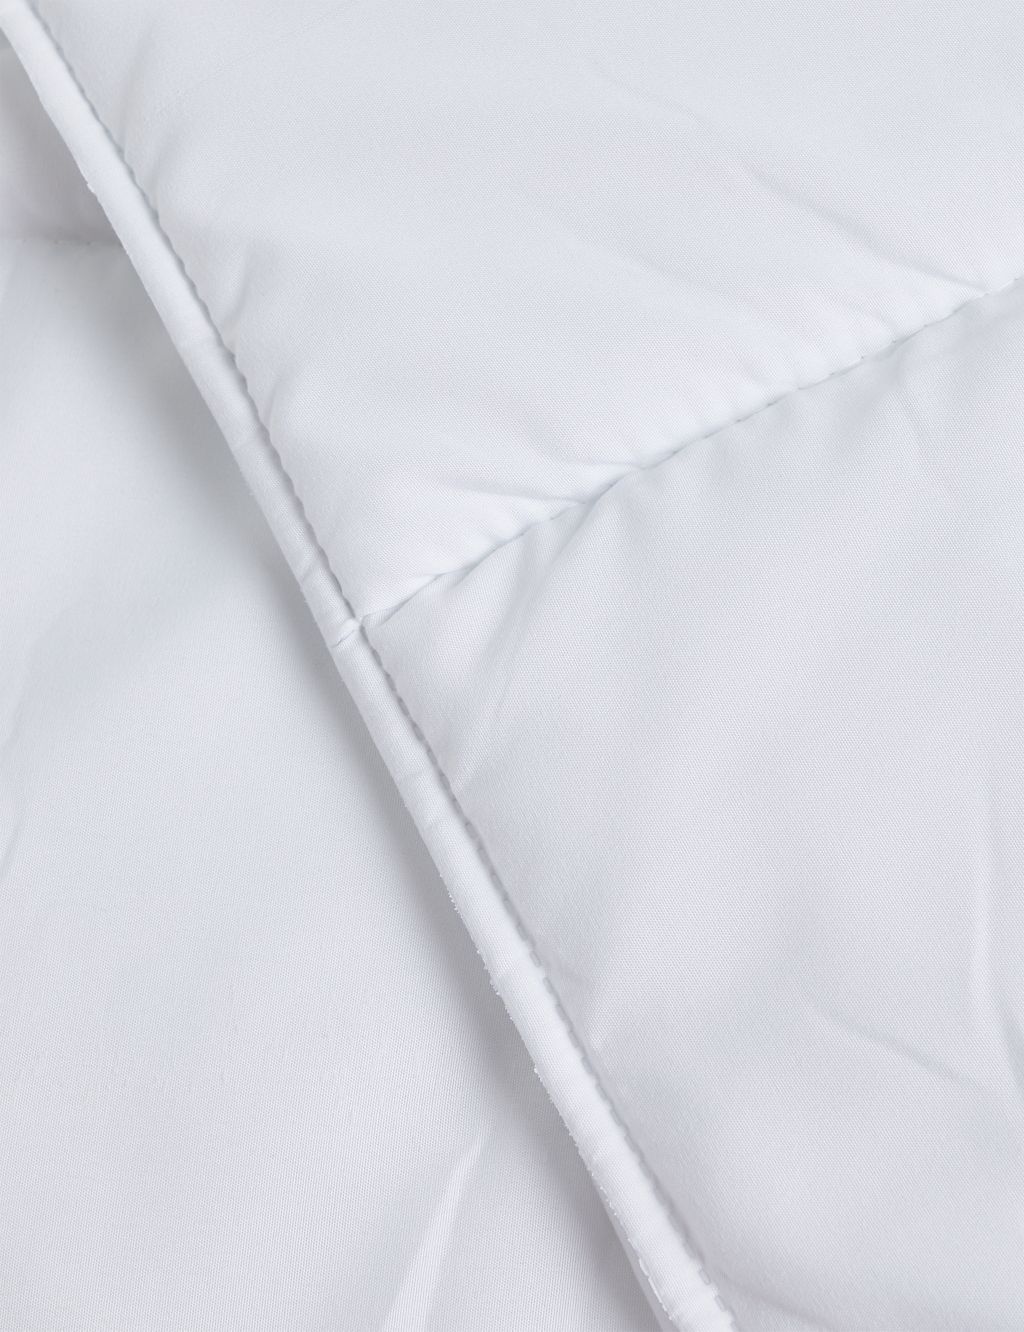 Simply Protect 4.5 Tog Duvet image 3